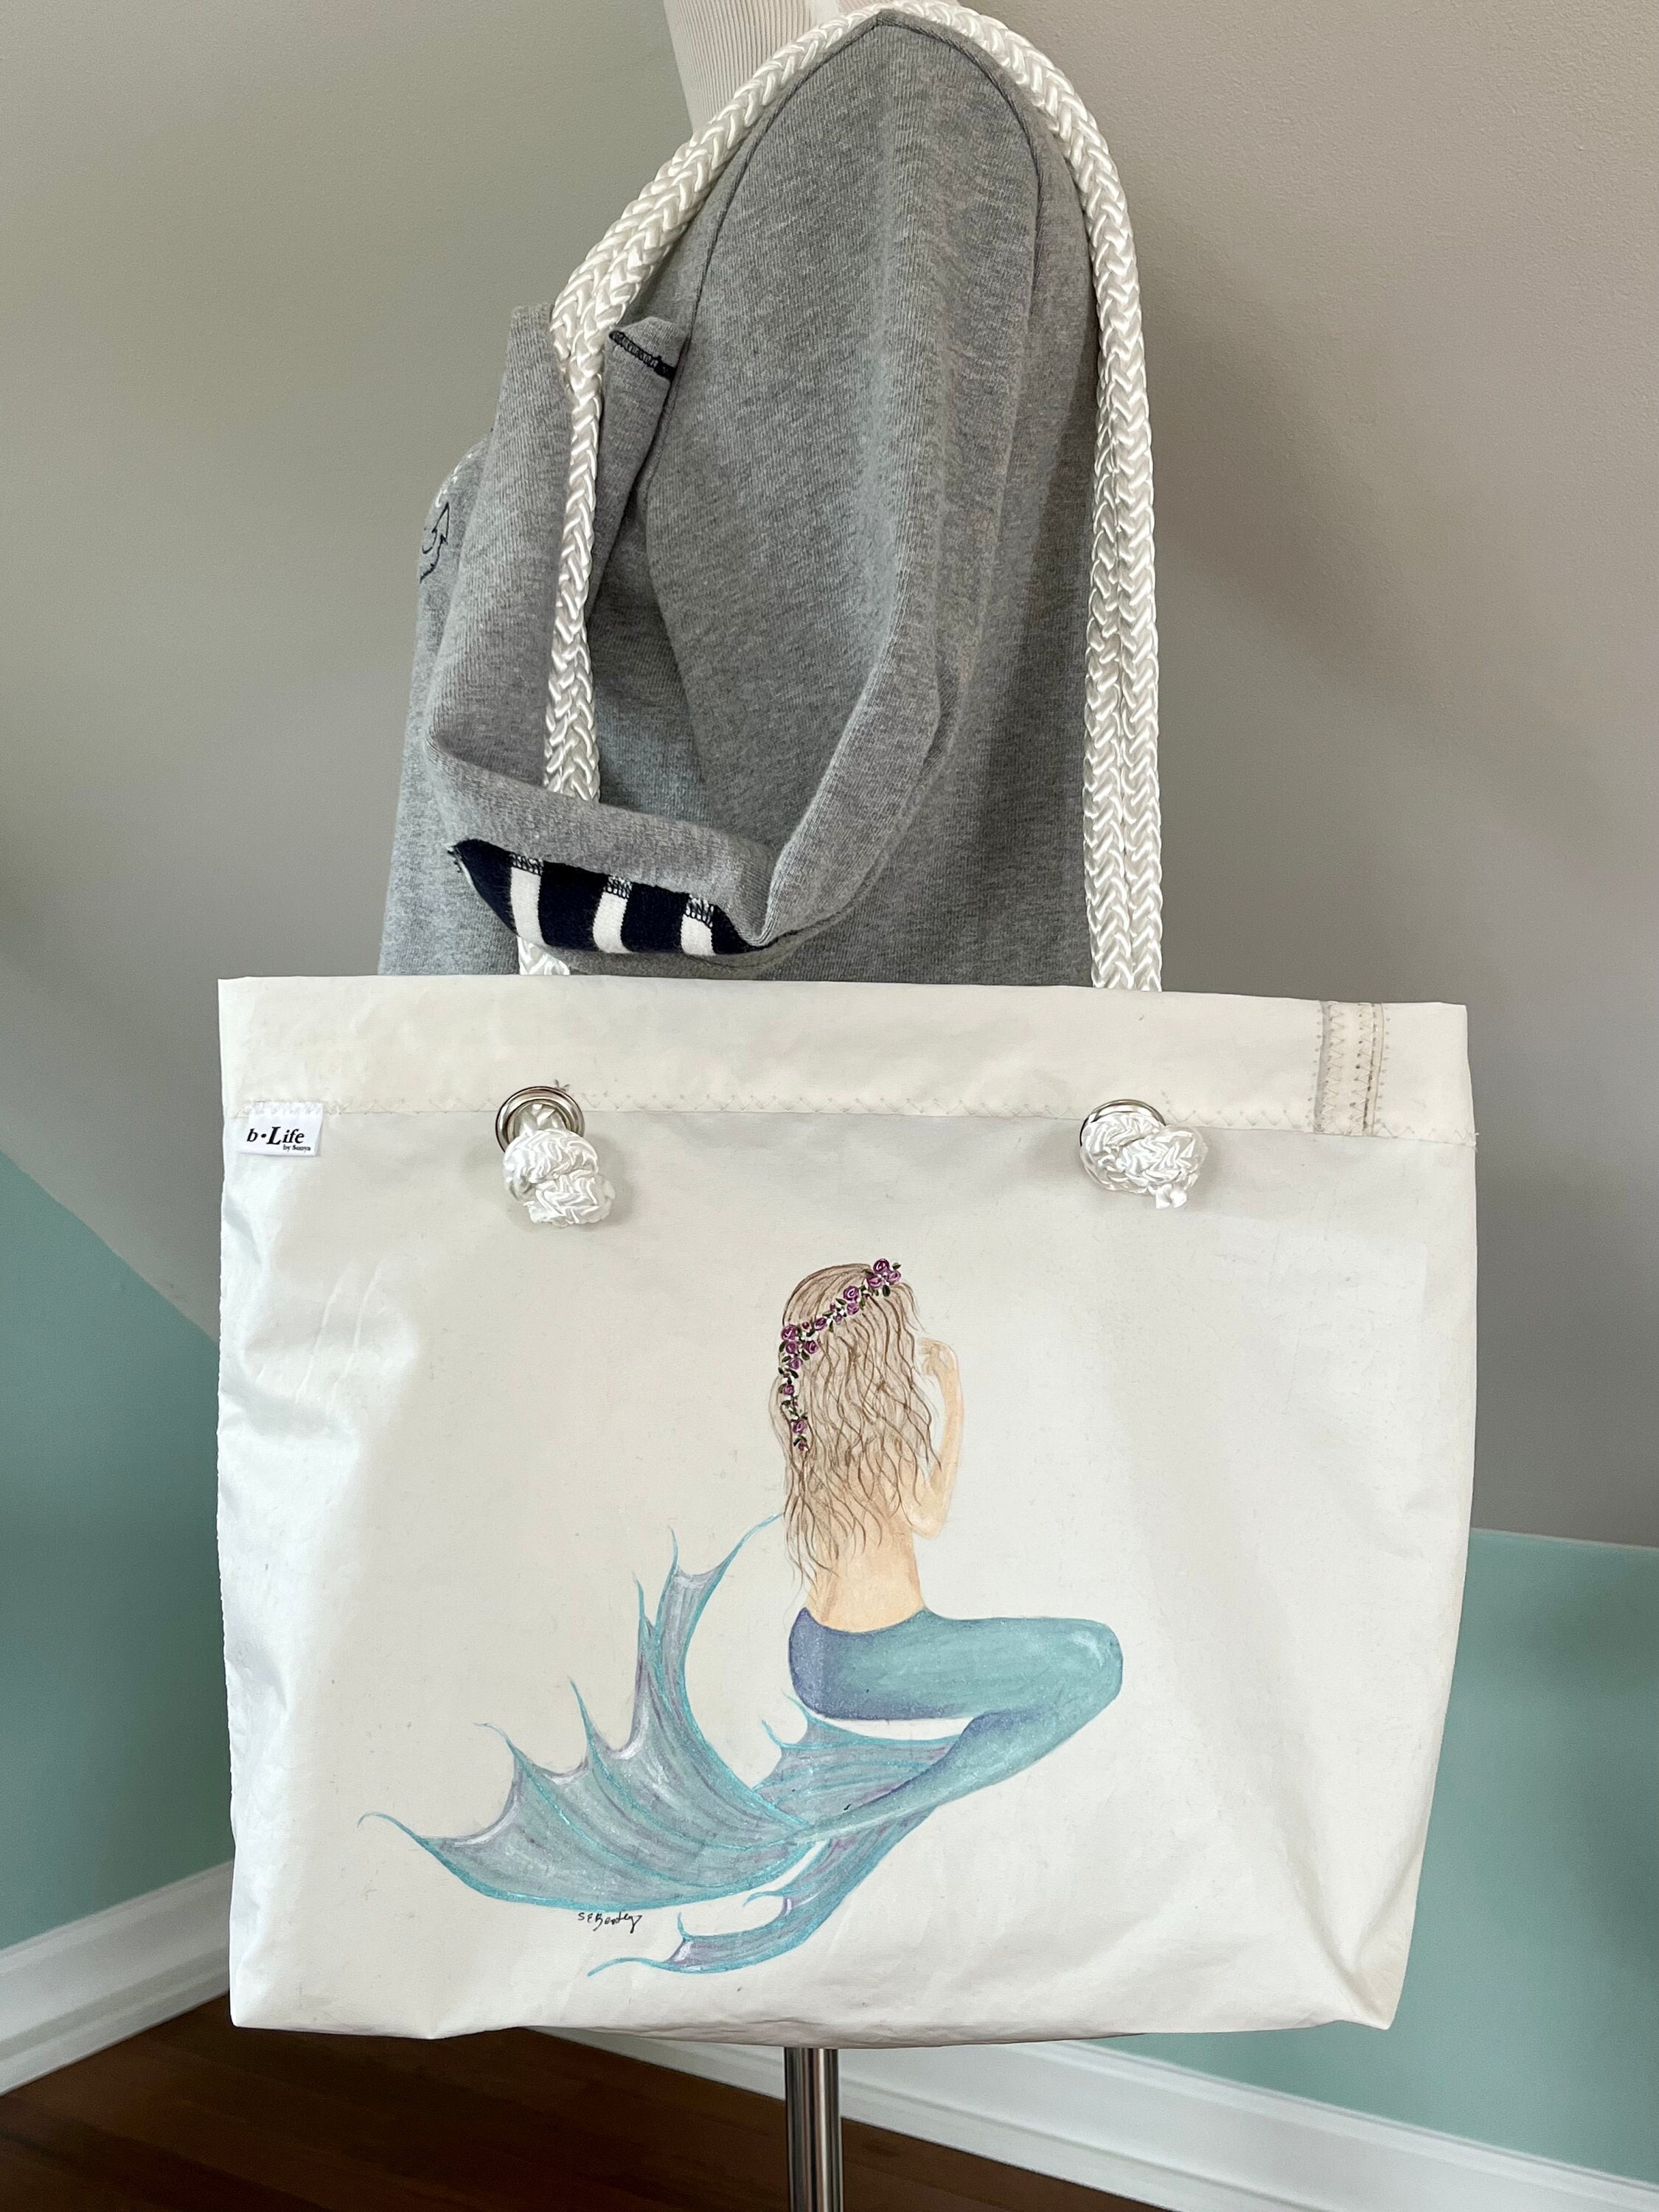 Sea Bags Recycled Sail Cloth Custom Last Name Guest Book Tote Large